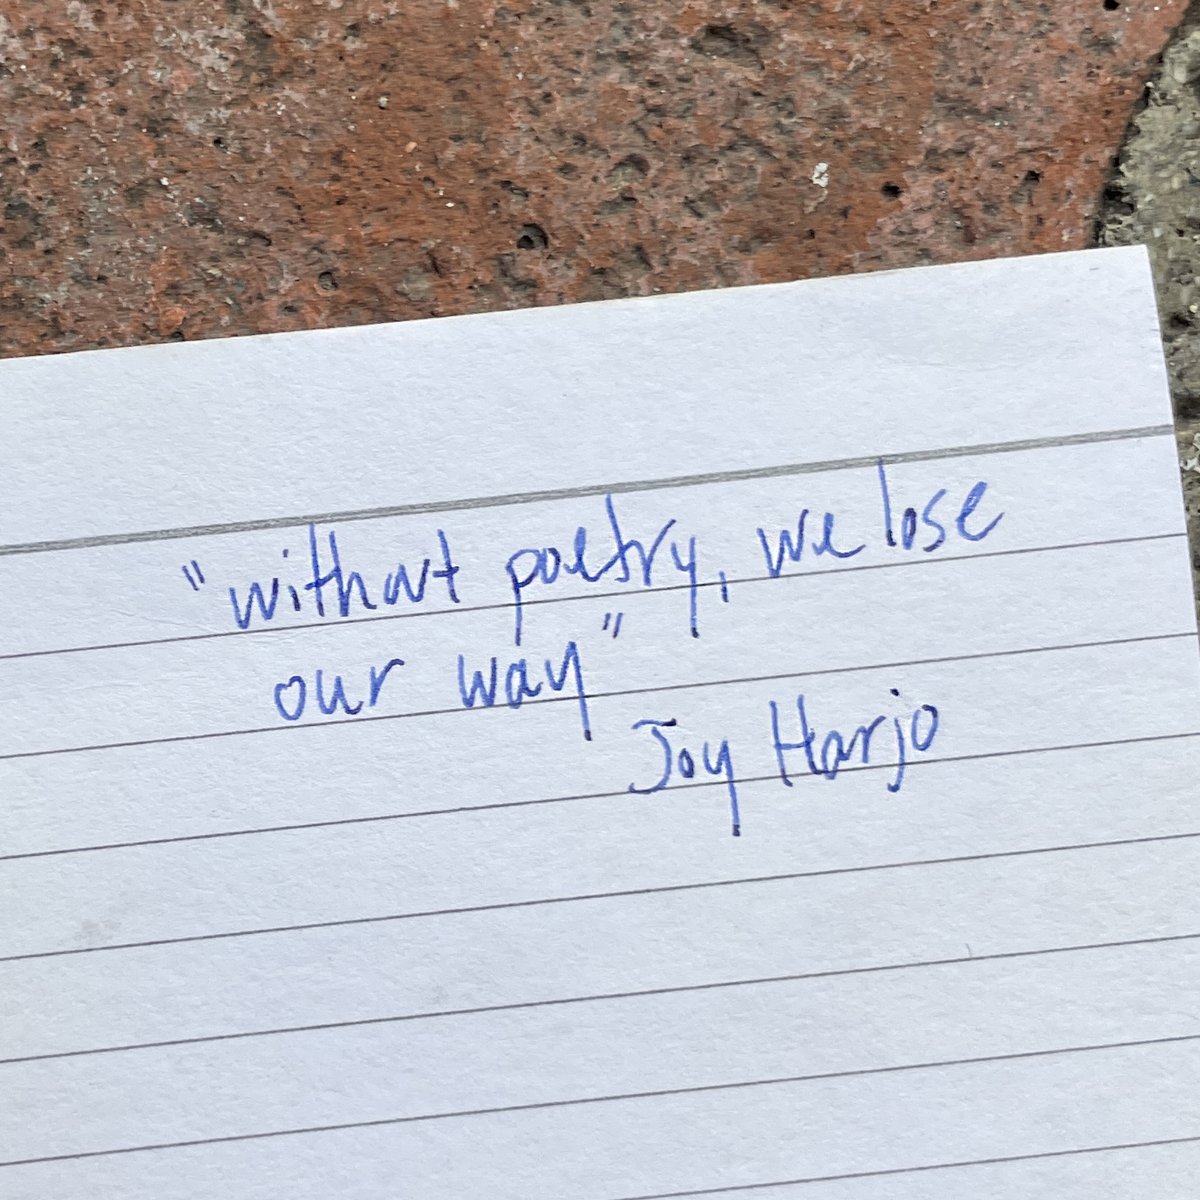 Happy National Poetry Month! 📝 Quote from Joy Harjo, the 23rd United States Poet Laureate & first Native American to hold that honor 💜

Check out the newest season of our podcasst Get Lit Minute to learn more about this incredible poet! 🔗 @JoyHarjo